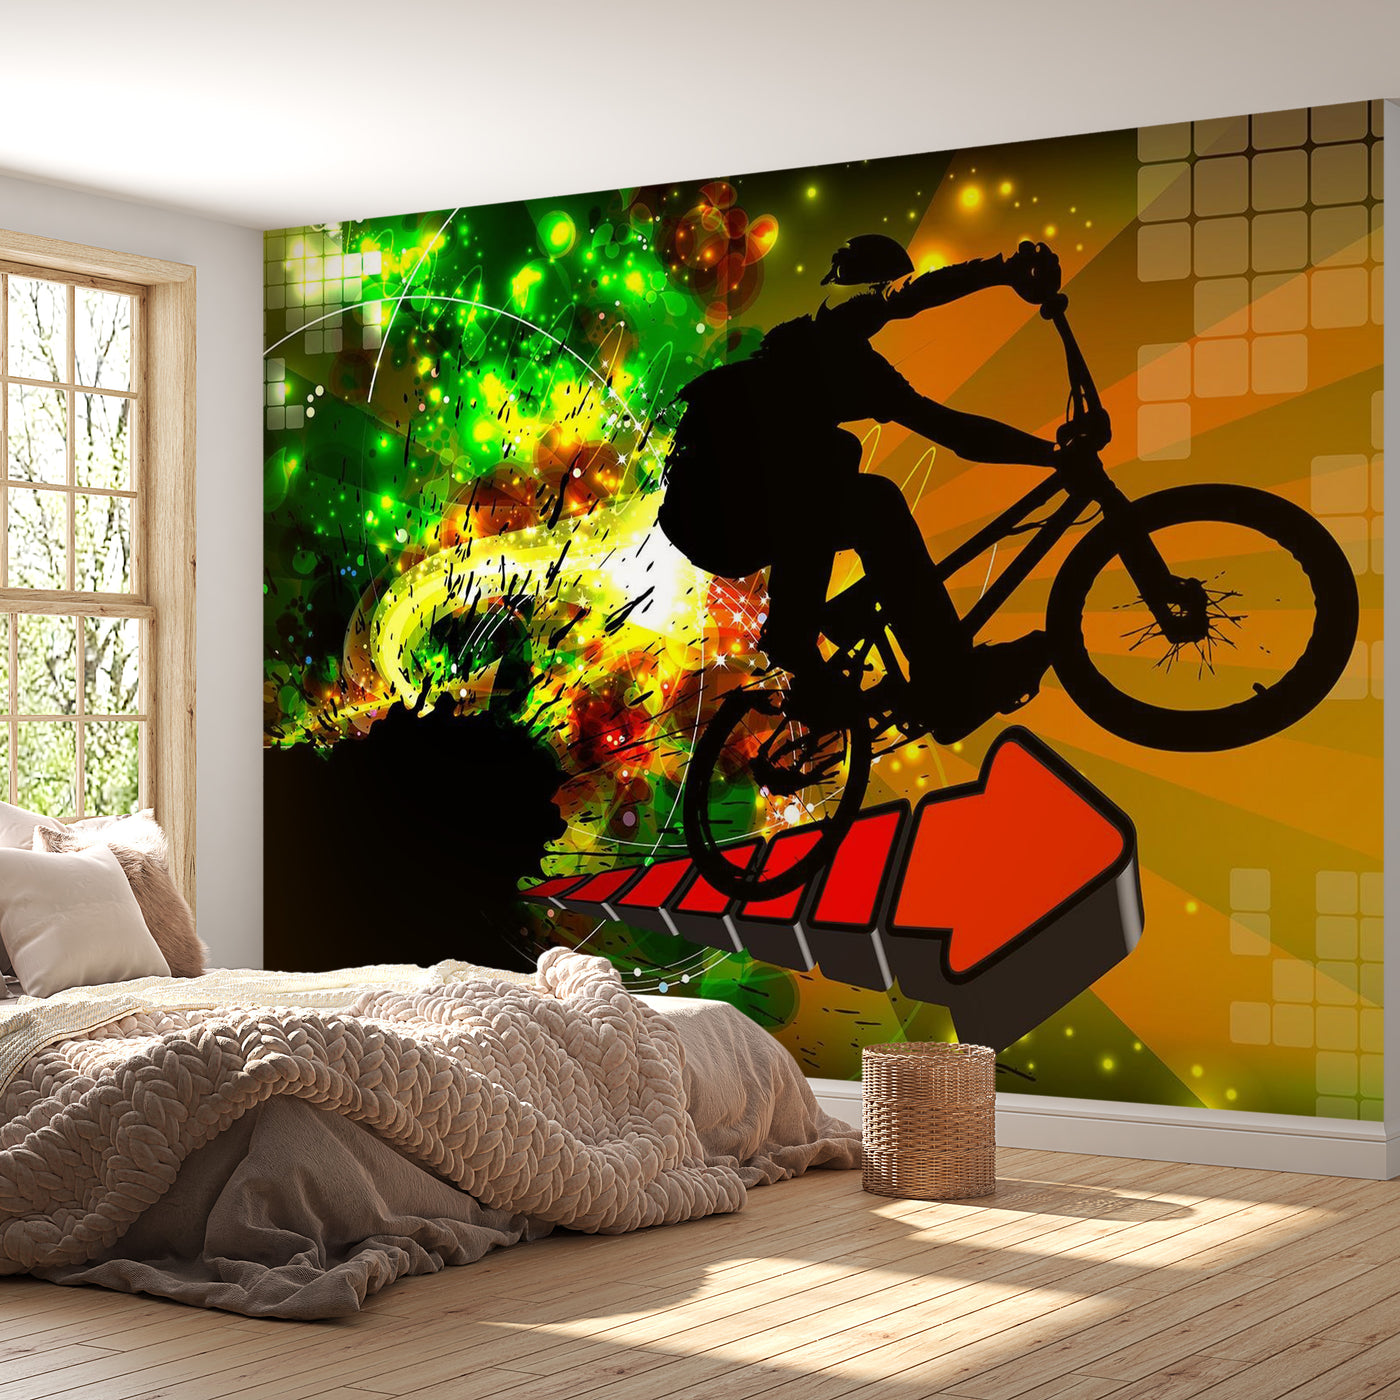 Peel & Stick Sports Wall Mural - Bicycle Tricks - Removable Wall Decals